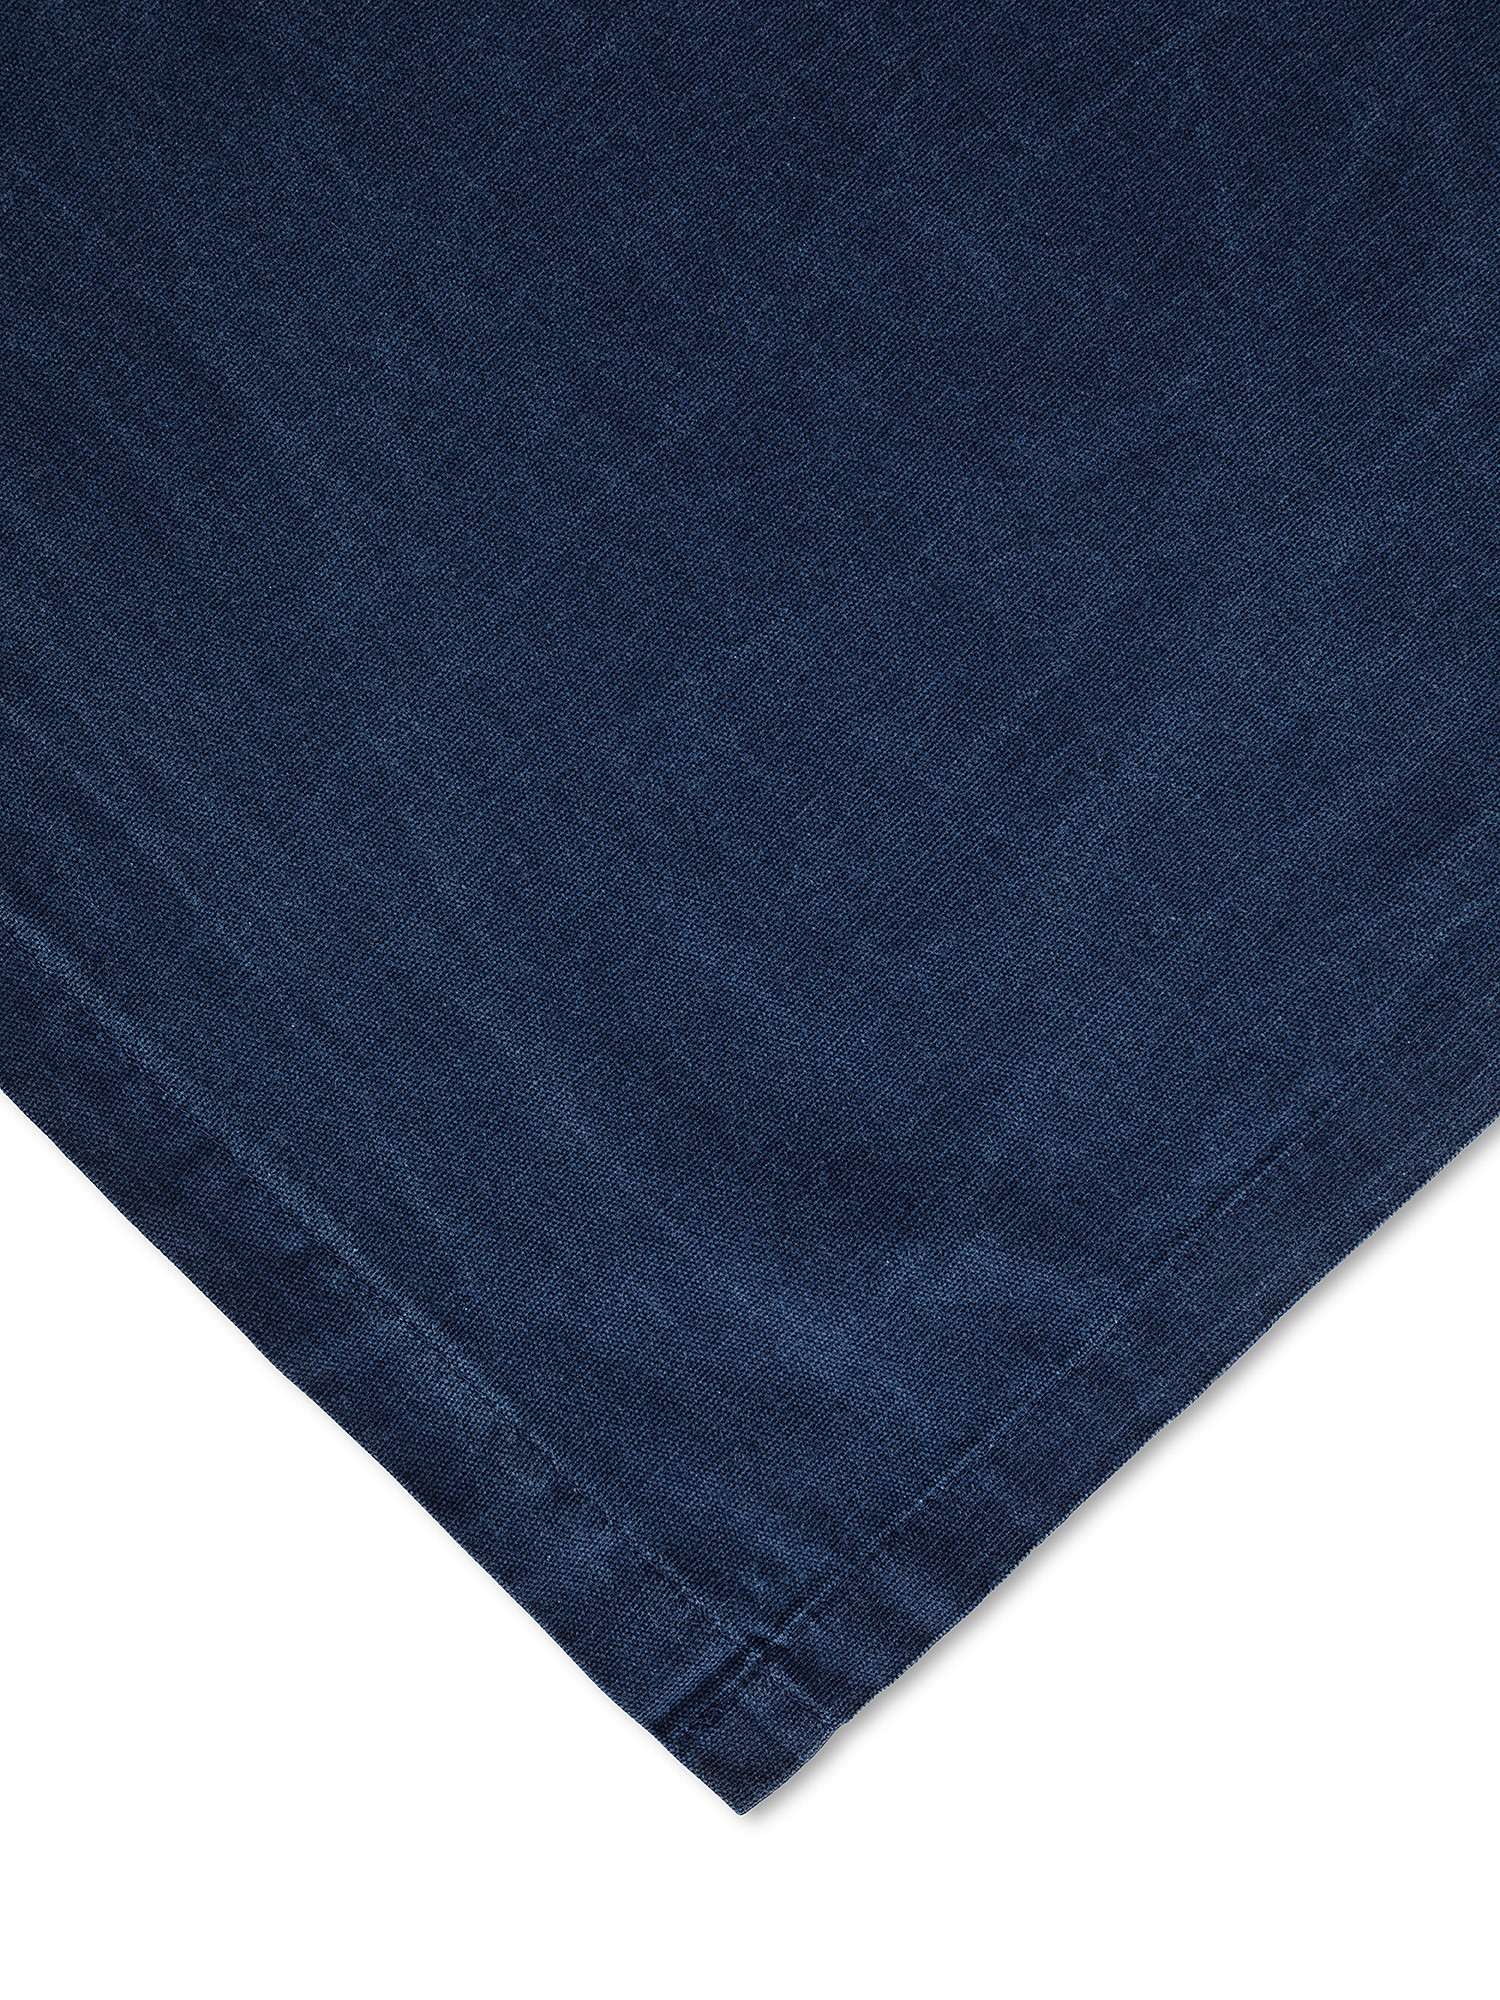 Solid color washed cotton centerpiece tablecloth, Blue, large image number 1